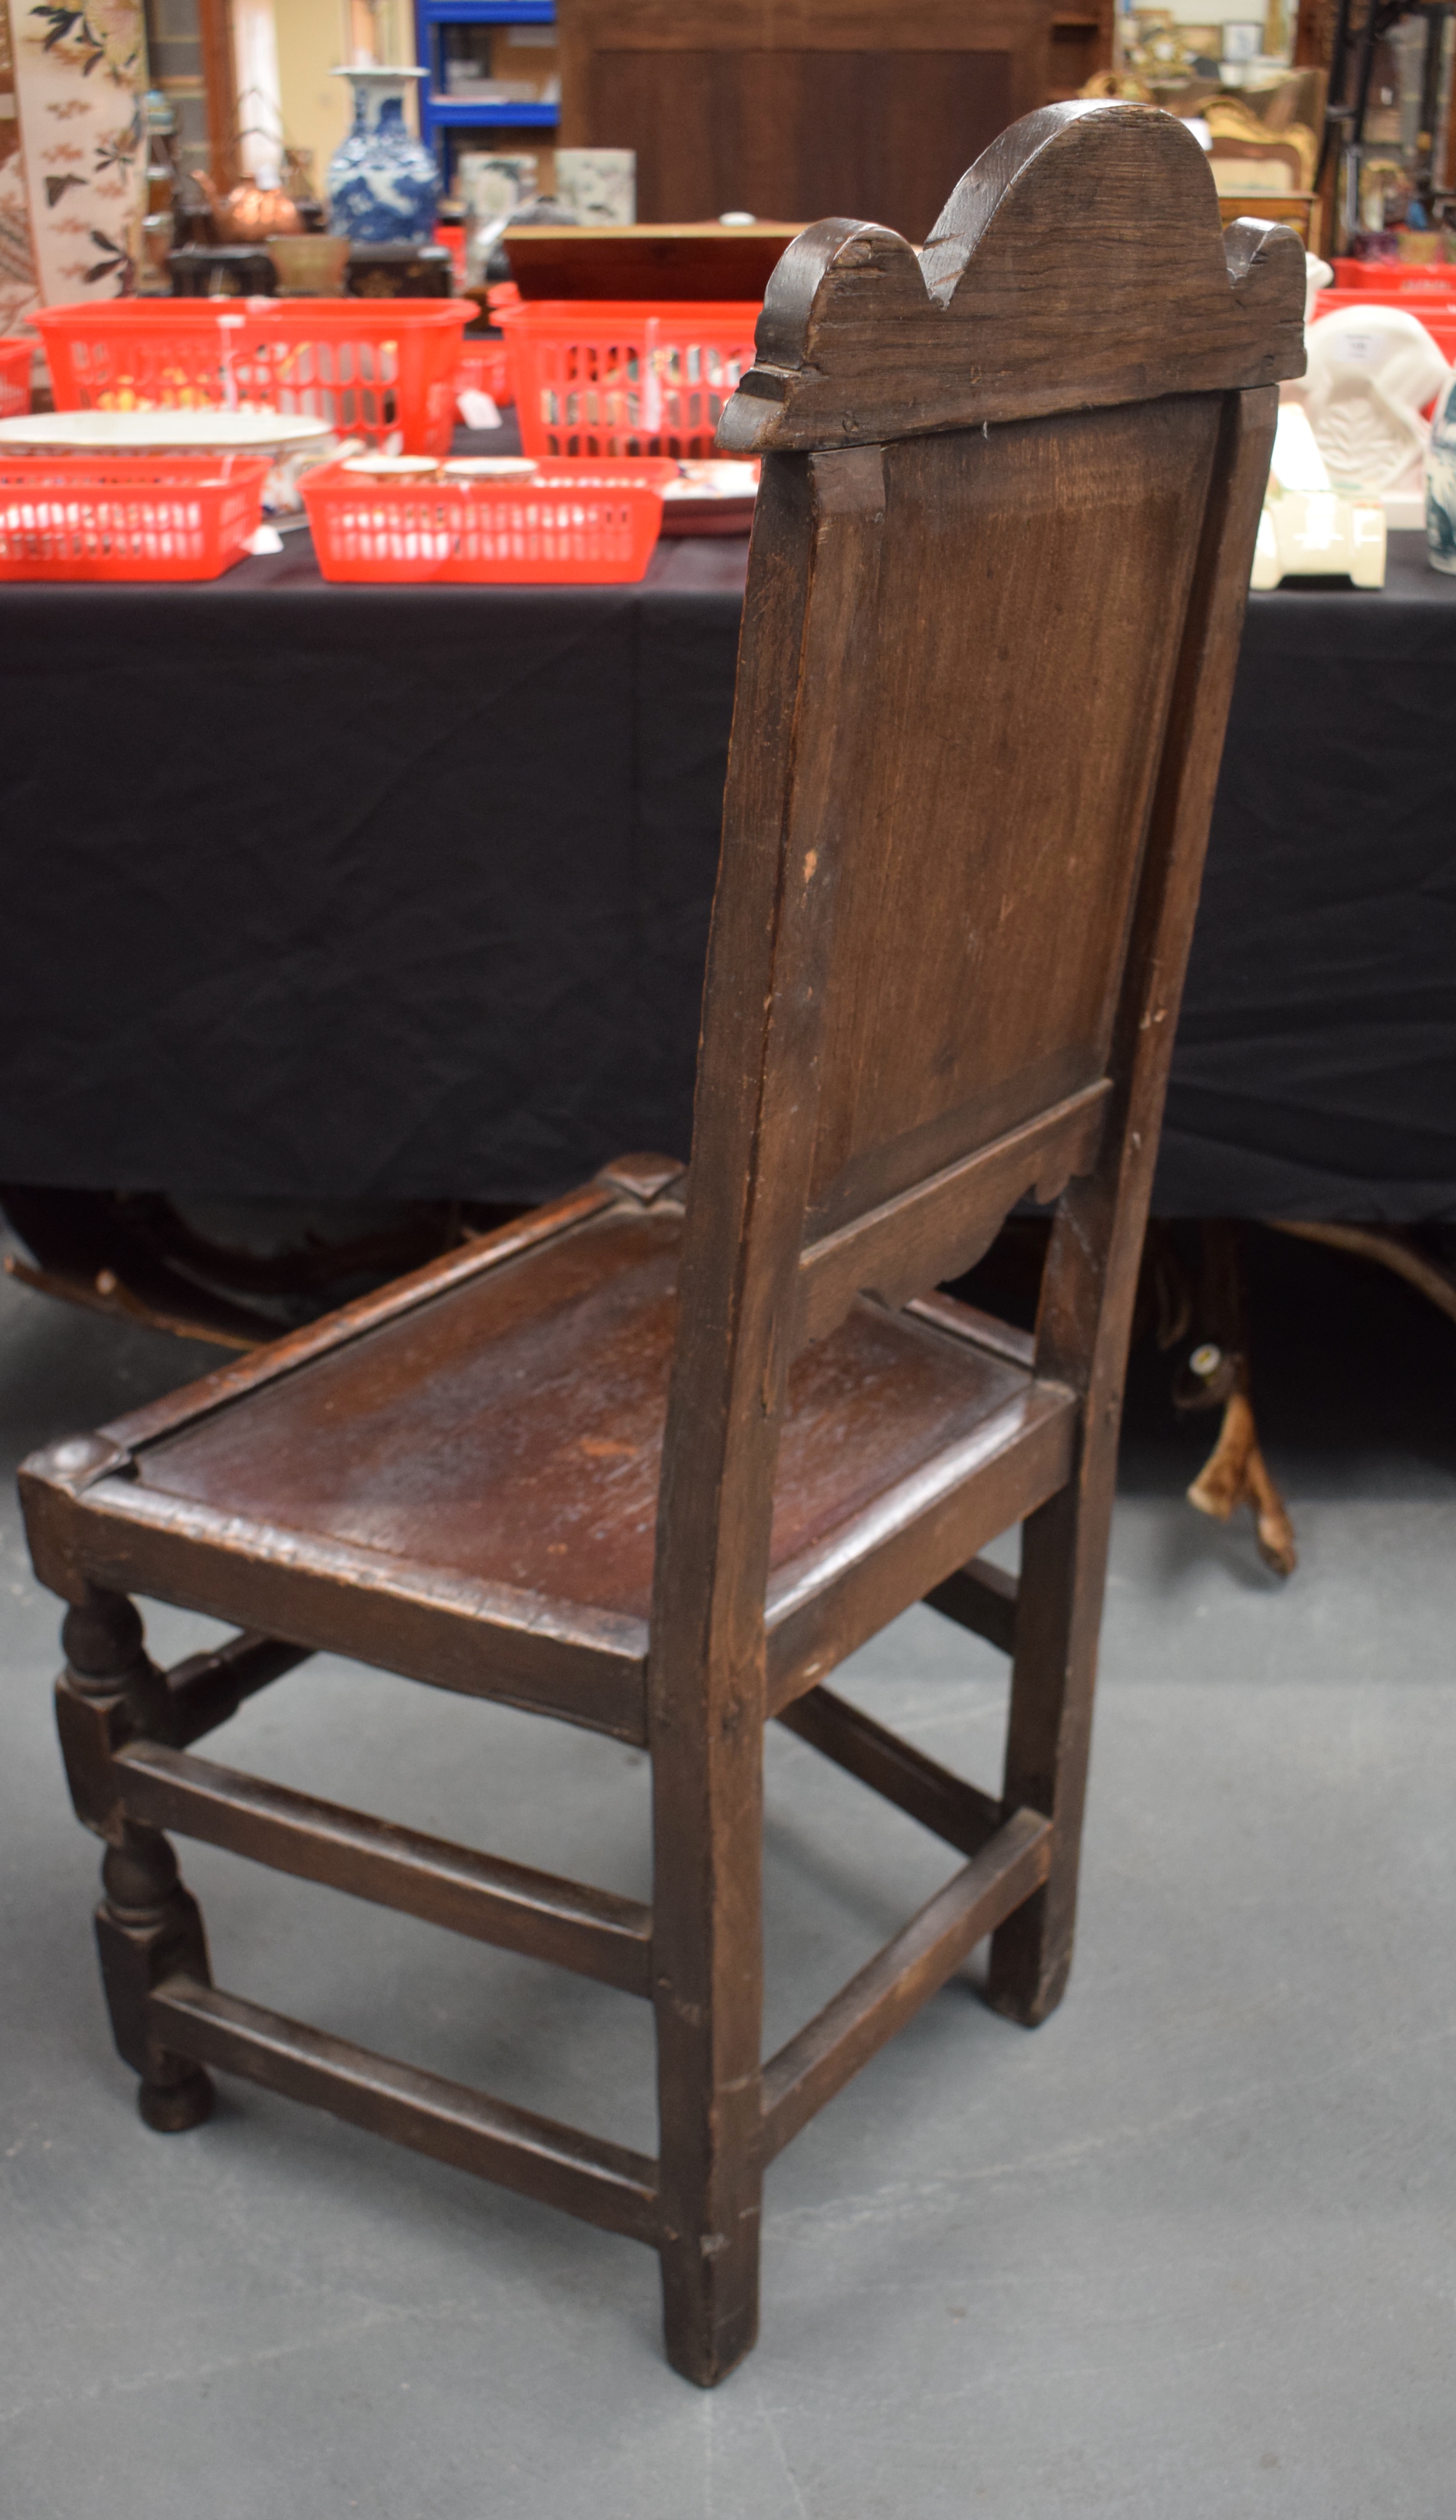 A 17TH CENTURY OAK DINING CHAIR with Tudor style floral back splat. 104 cm x 48 cm. - Image 4 of 5